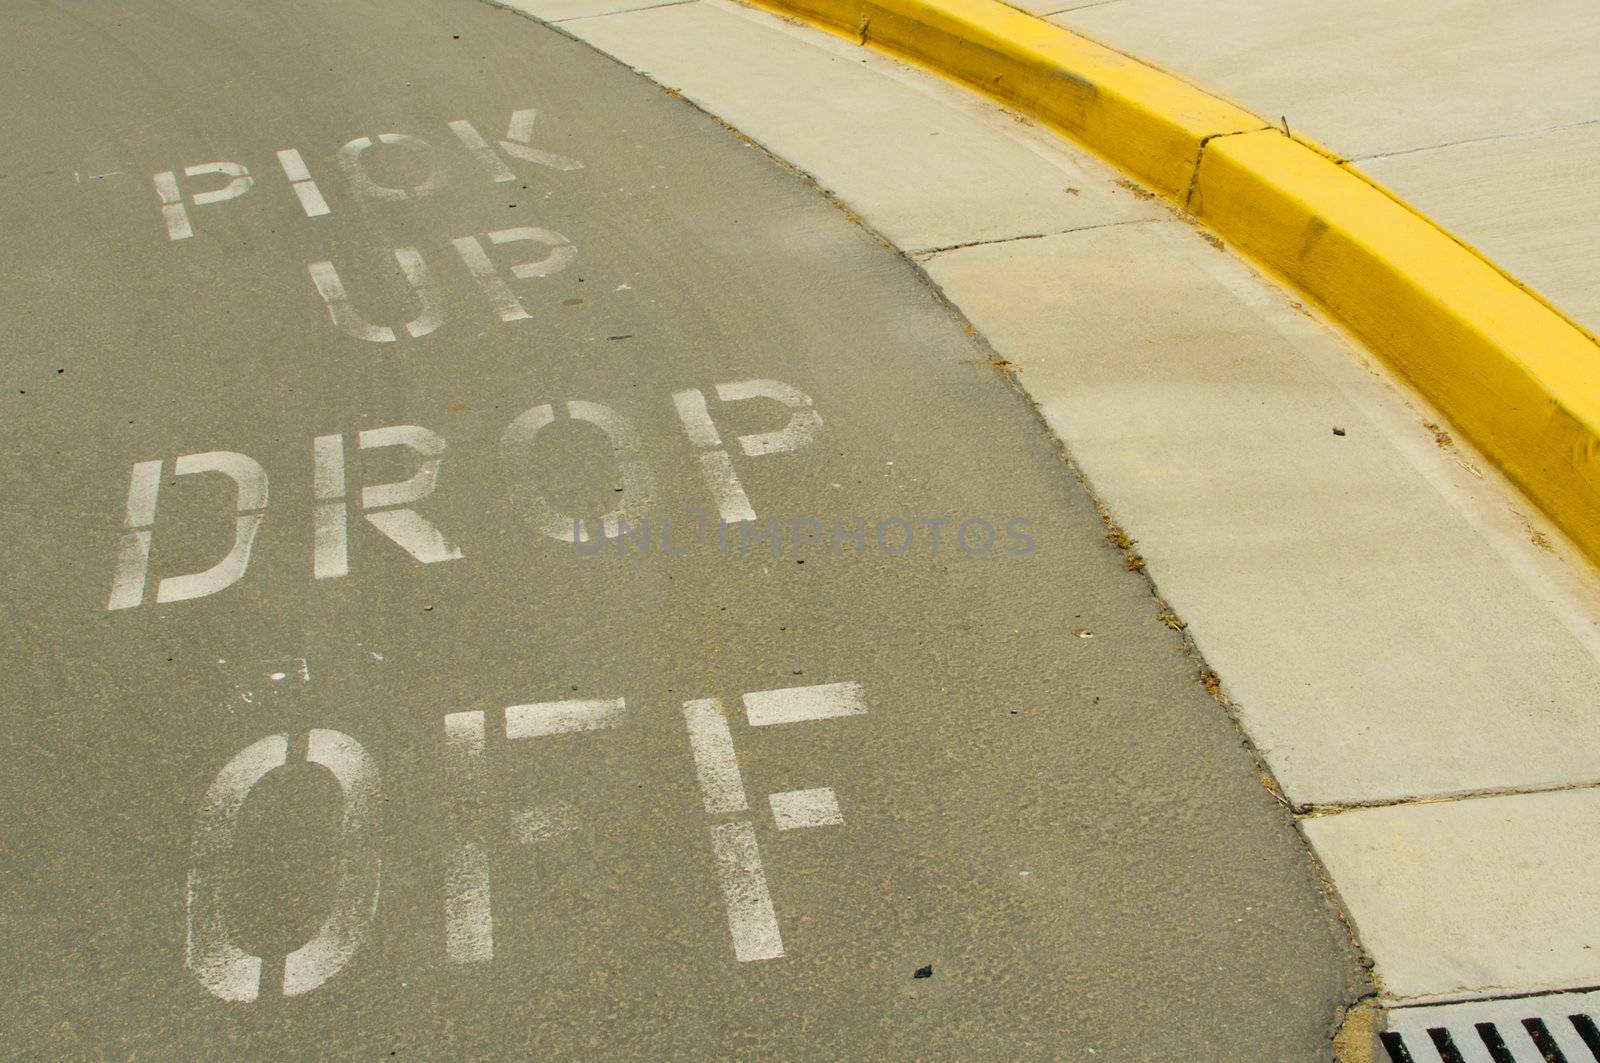 Pick Up, Drop Off Curb by Feverpitched